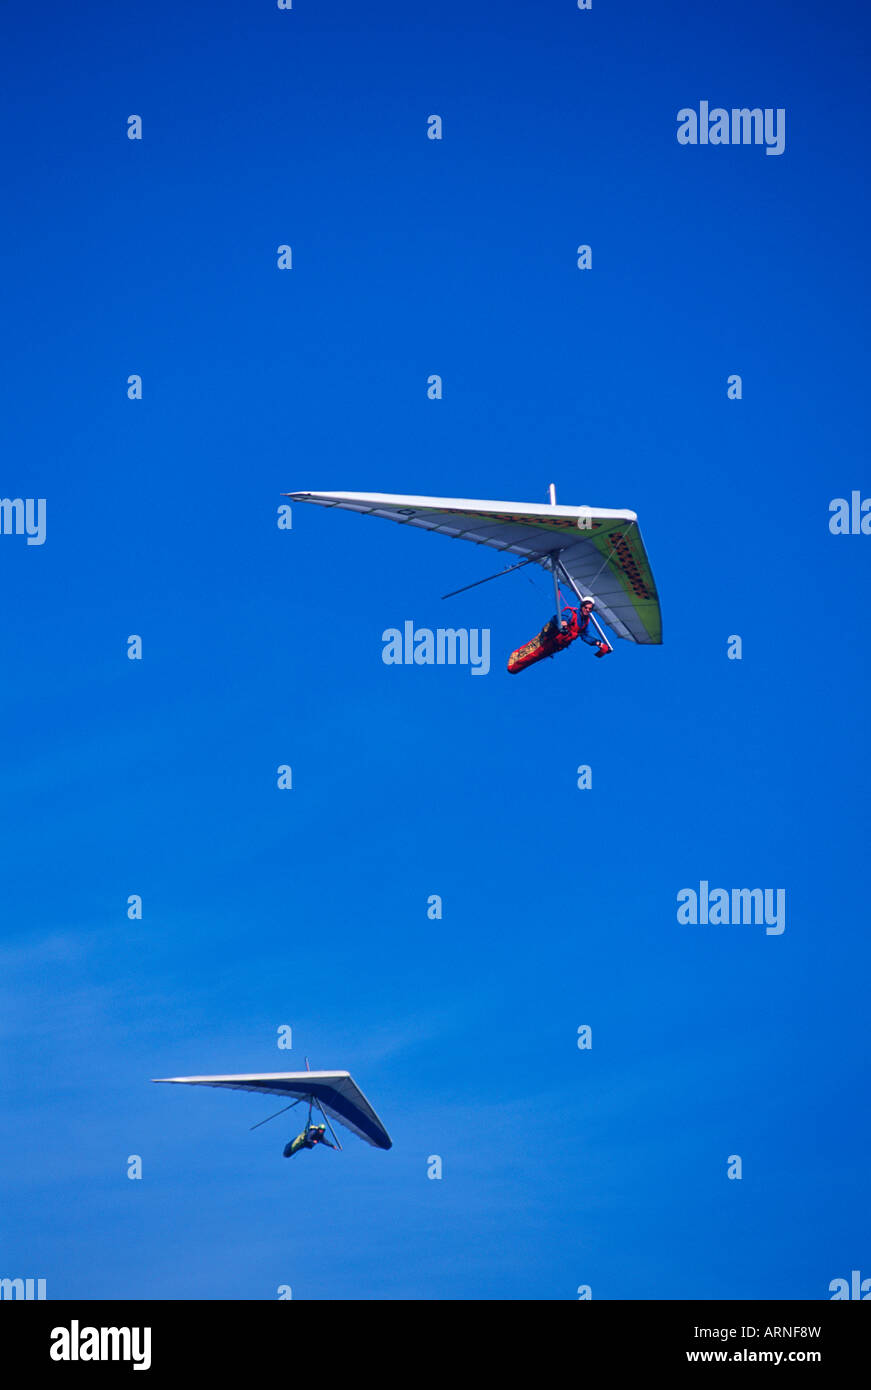 Hang gliders in flight on blue sky, British Columbia, Canada. Stock Photo